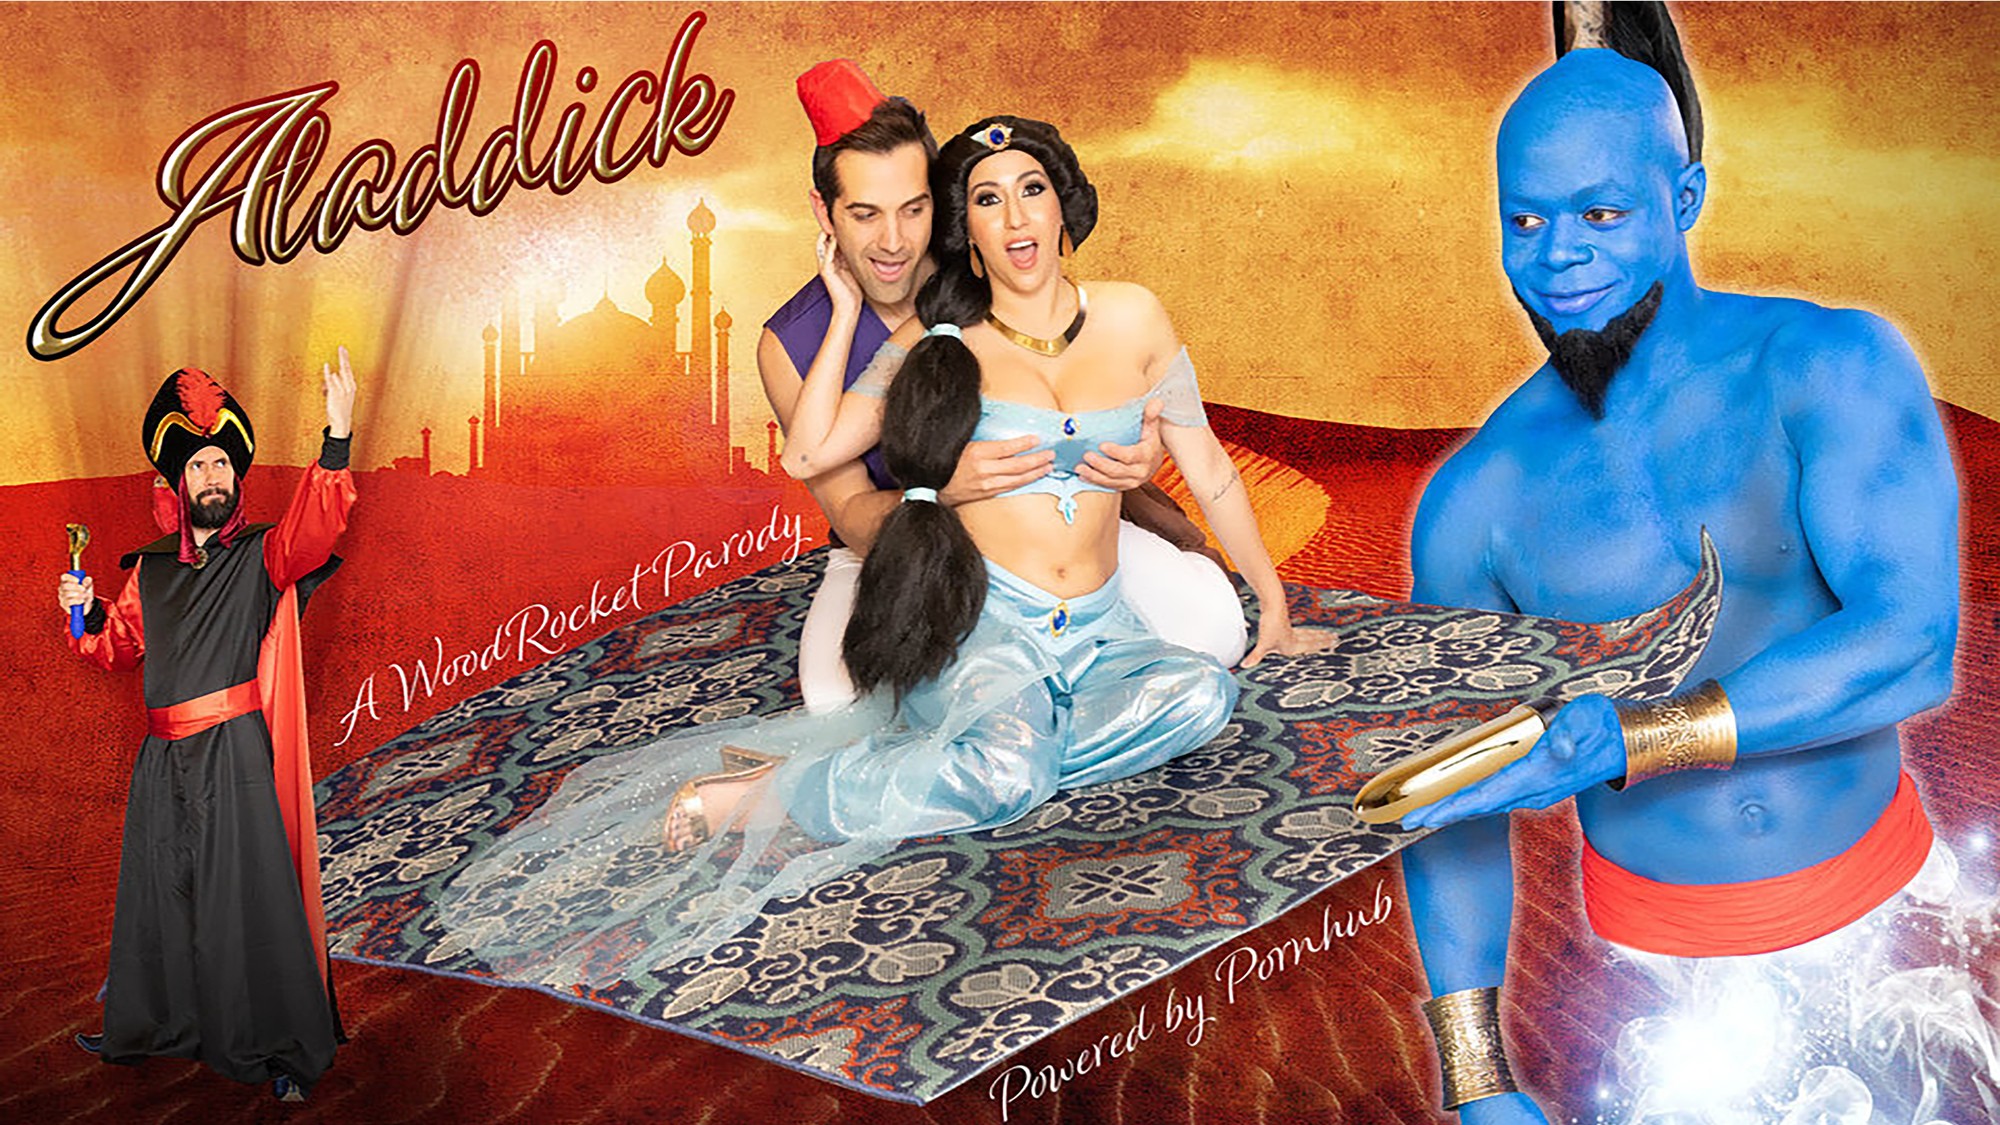 Aladdin Cartoon Porn - The 'Aladdin' Porn Parody Is Here and We Fixed Its Title - VICE